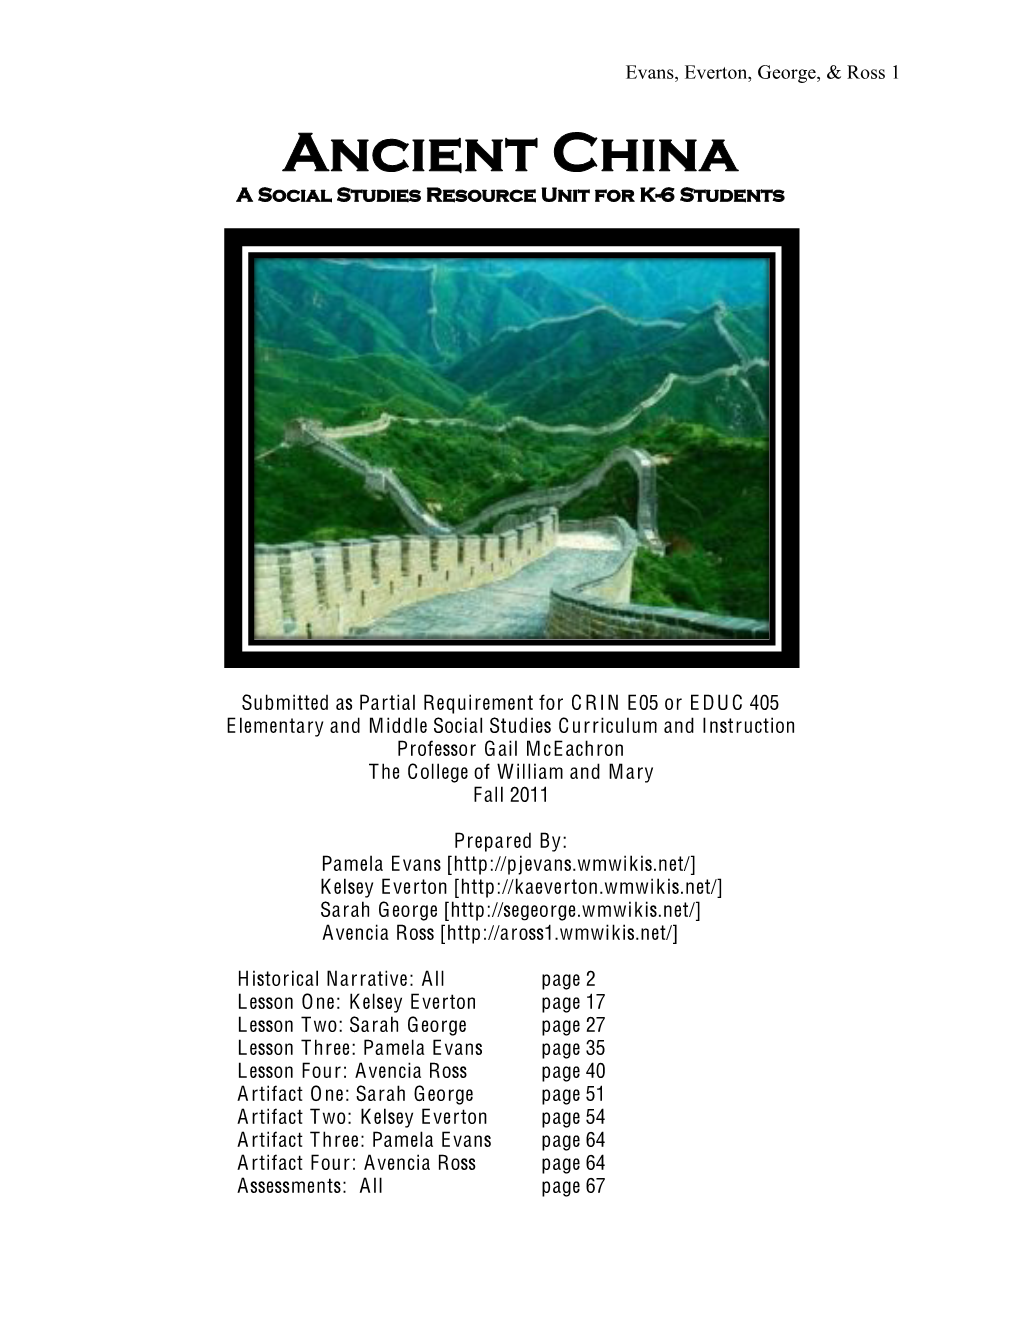 Ancient China a Social Studies Resource Unit for K-6 Students